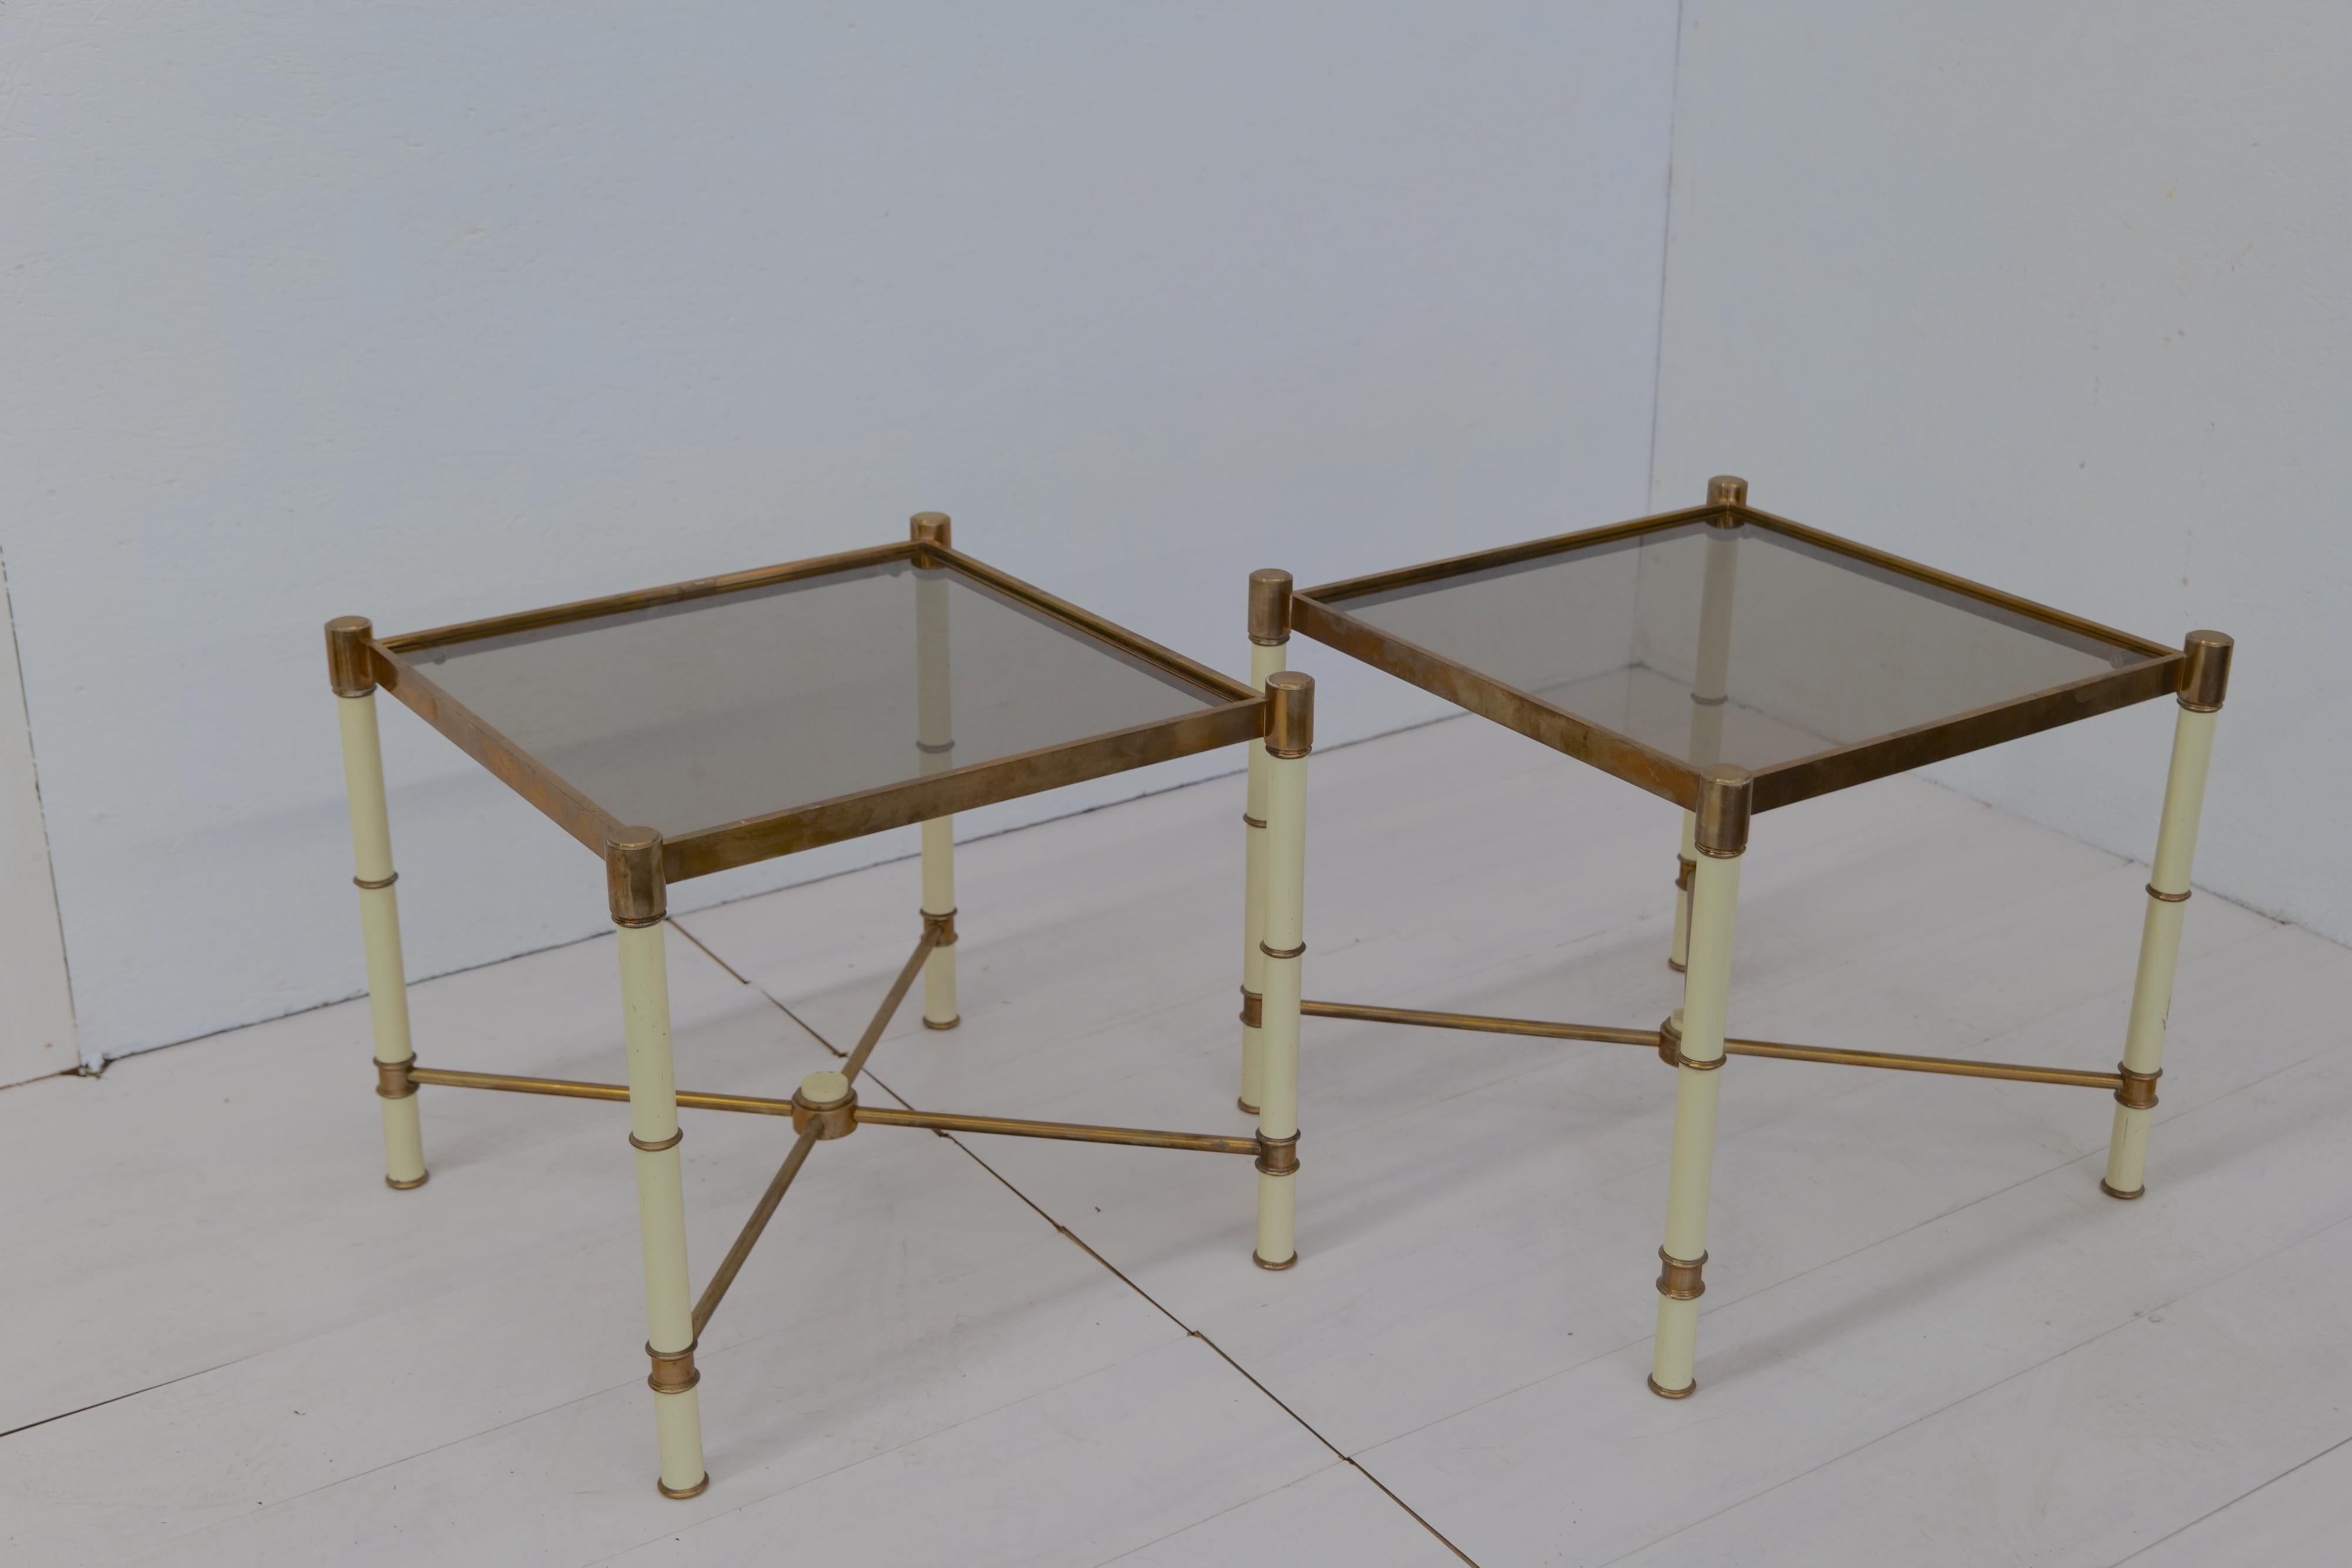 The Pair of 2 midcentury Side Tables from the 1980s is a stylish set that embodies the essence of midcentury design. With their sleek lines and timeless appeal, these tables offer both functionality and aesthetic charm. The perfect addition to any